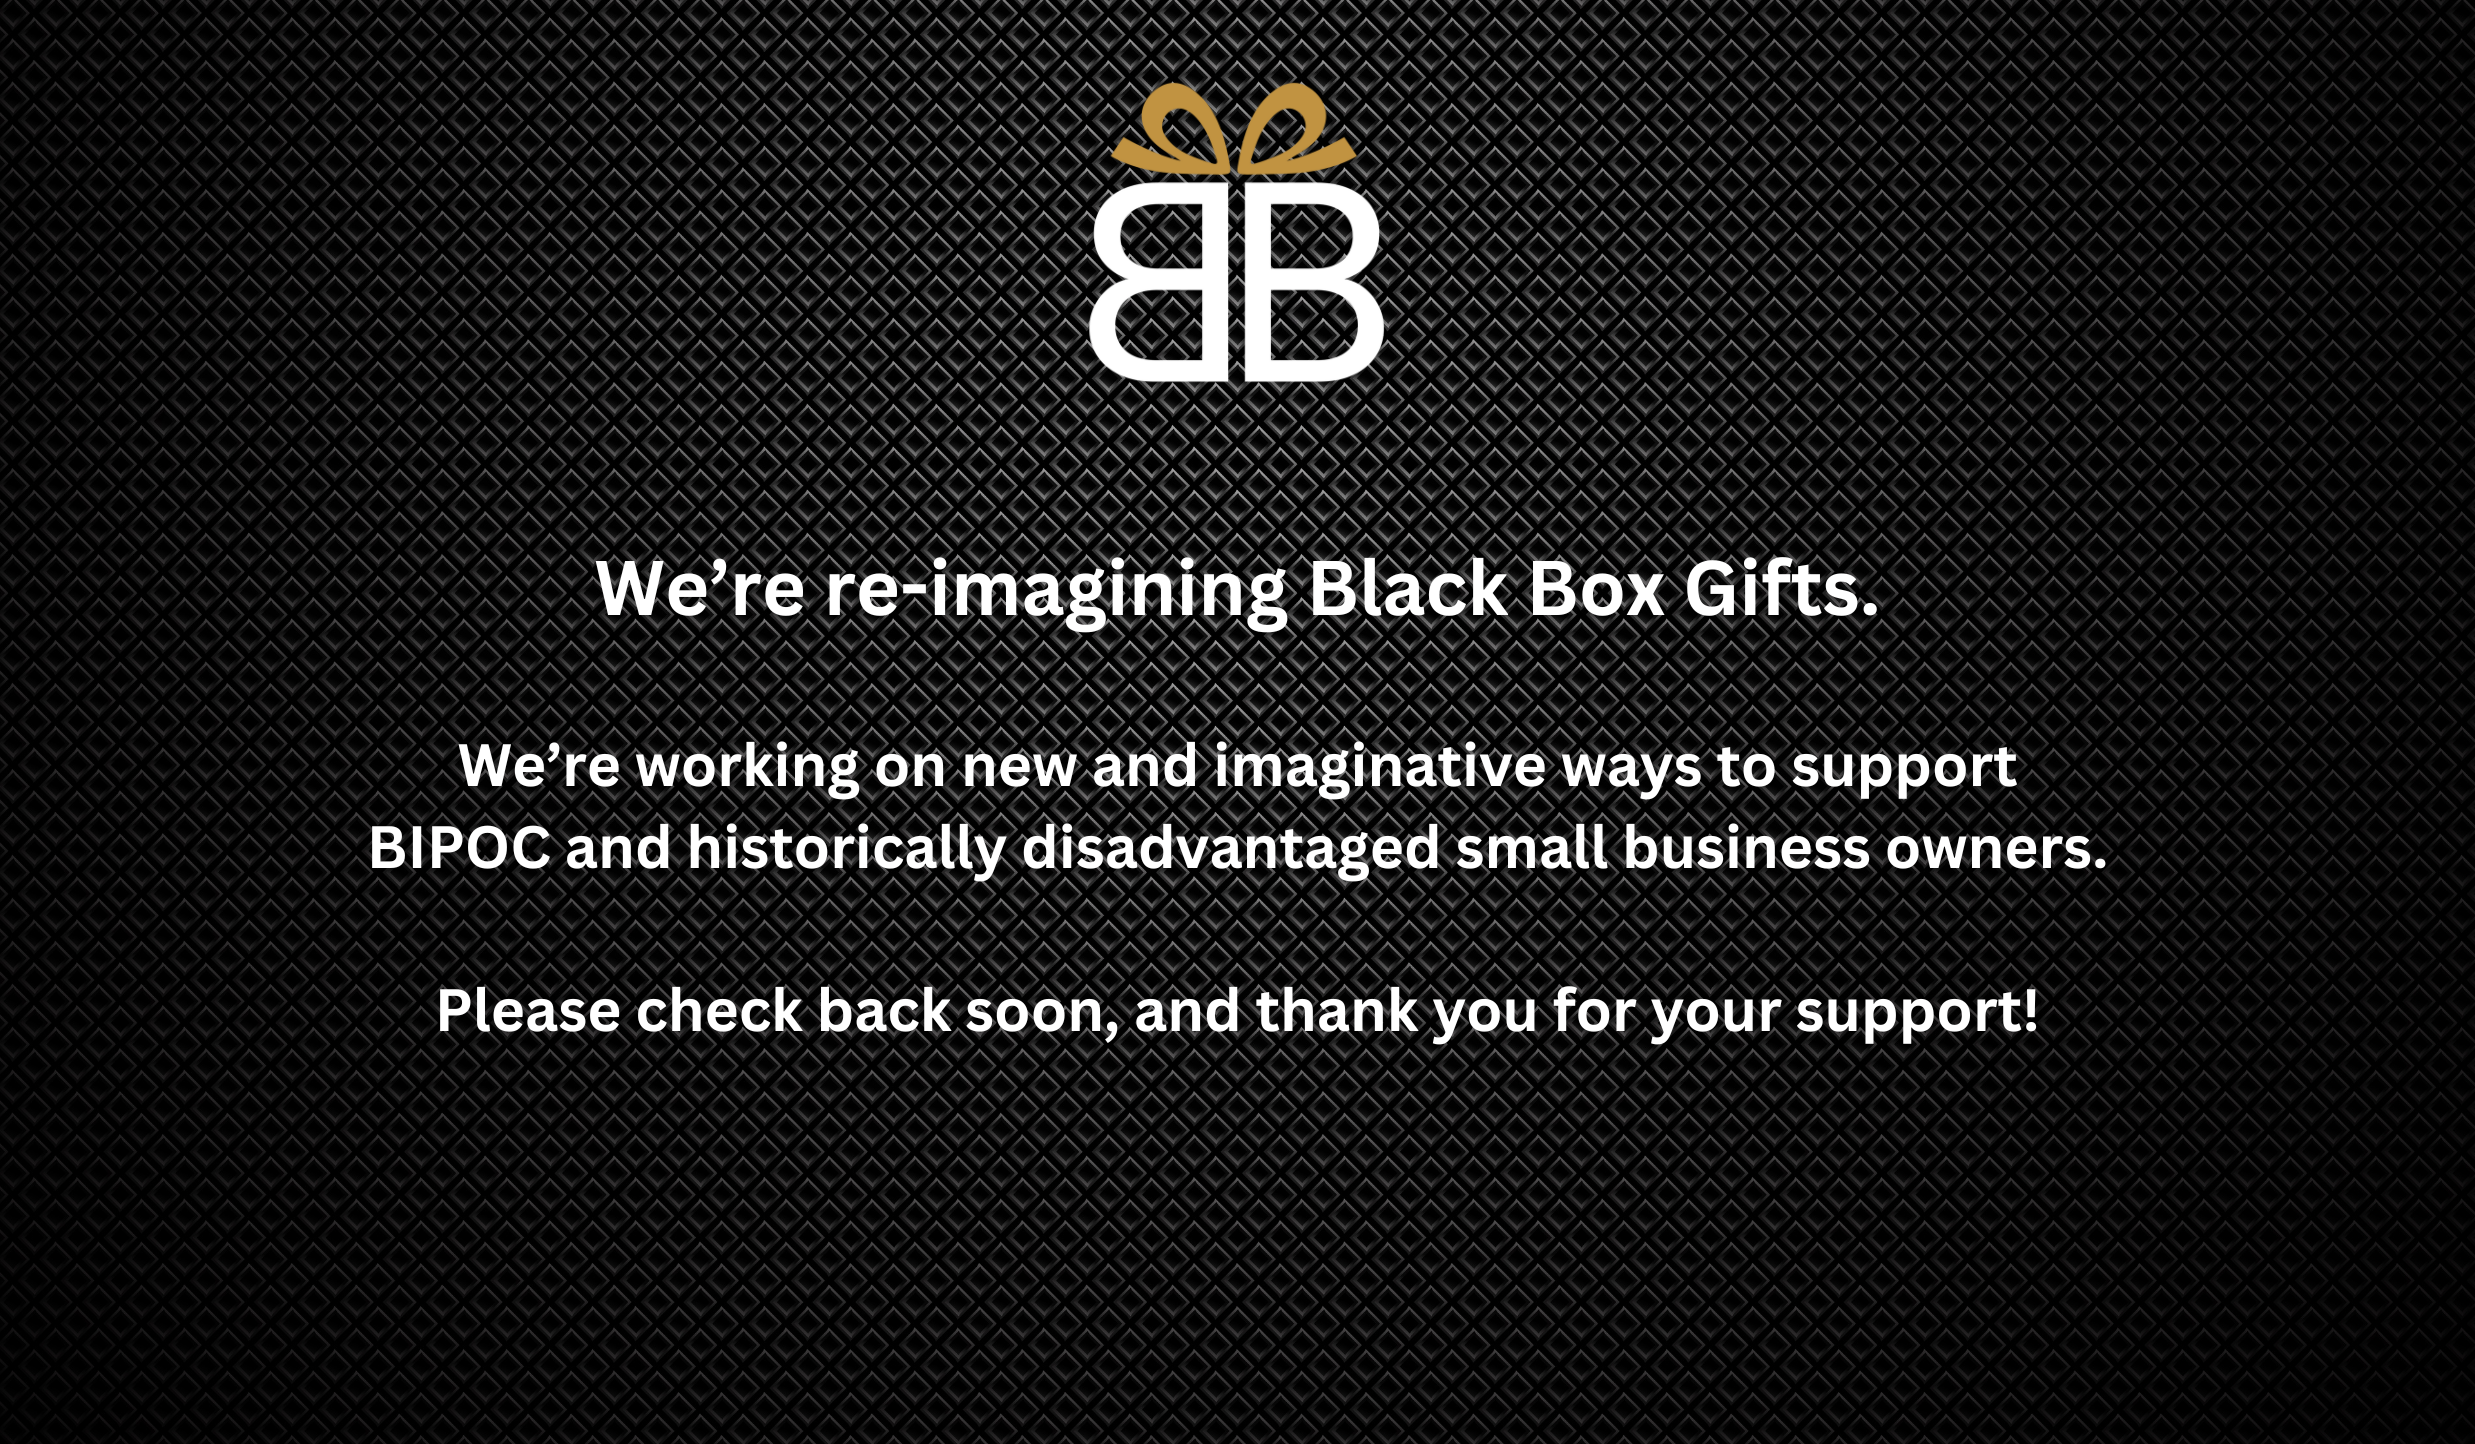 We’re reimagining how to best support Black-owned and BIPOC-owned businesses. Stay tuned for more information from Black Box Gifts.